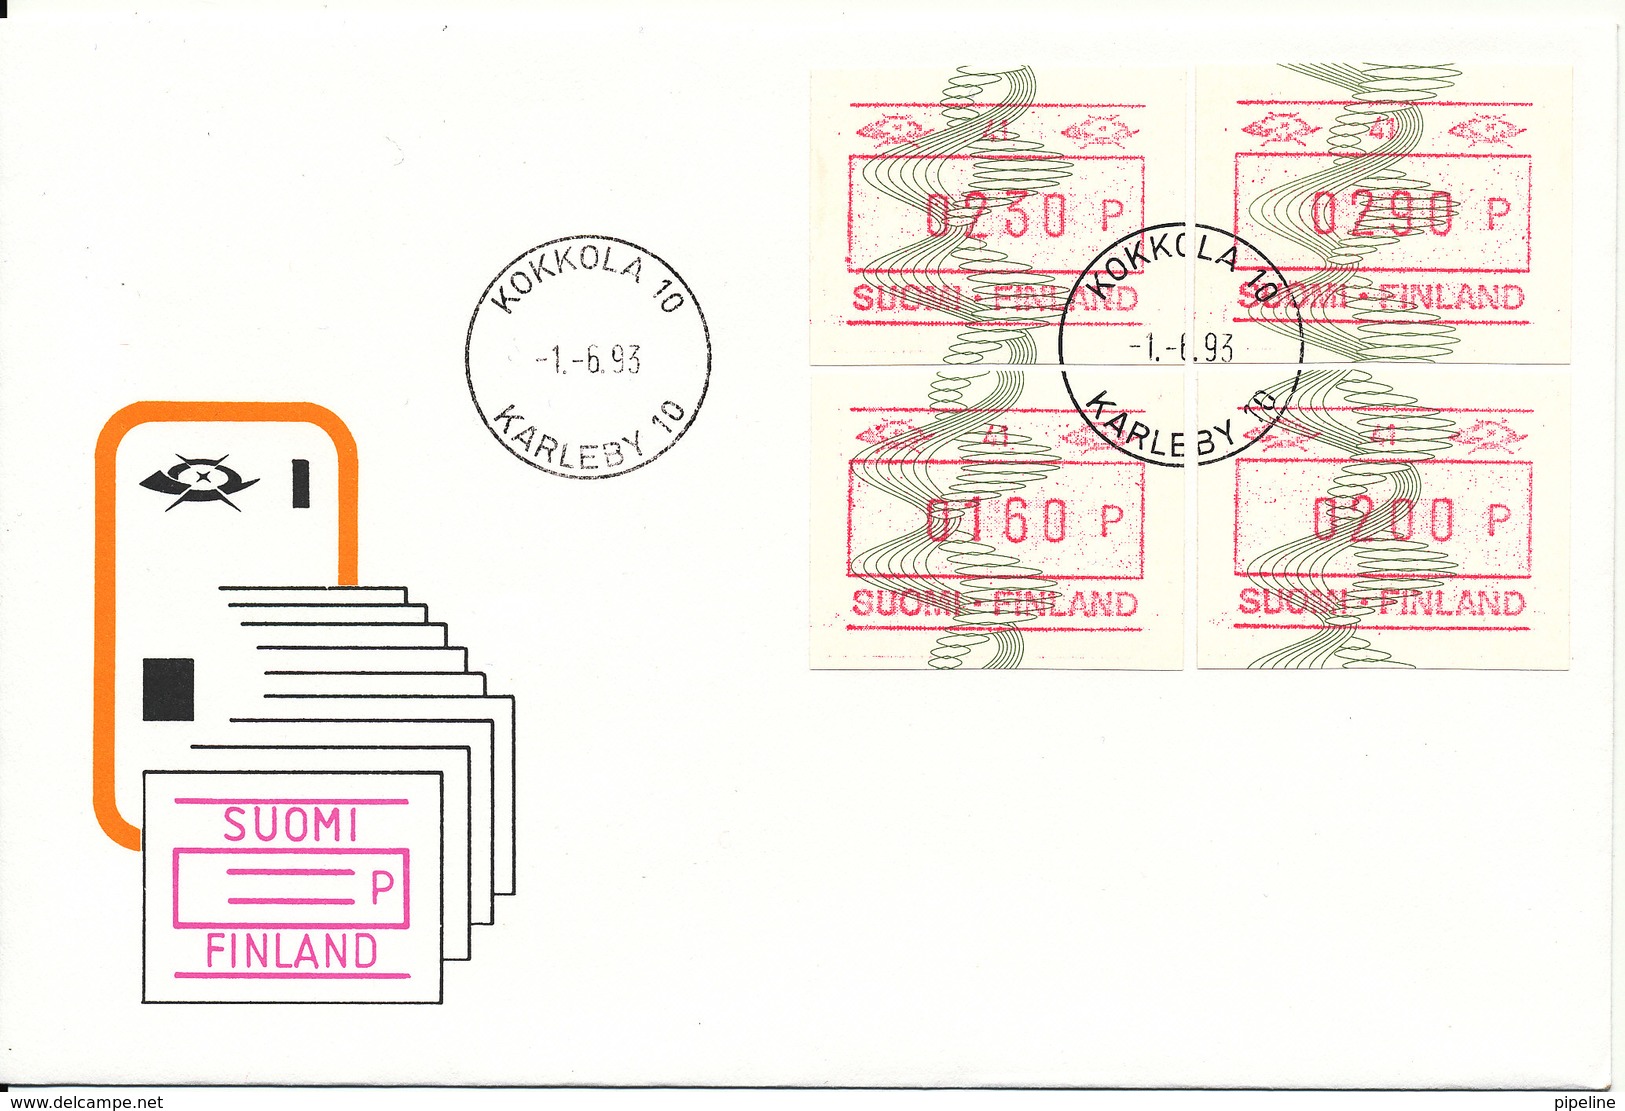 Finland FDC Karleby 1-6-1993 Set Of 4 FRAMA Labels (41) With Cachet - Machine Labels [ATM]